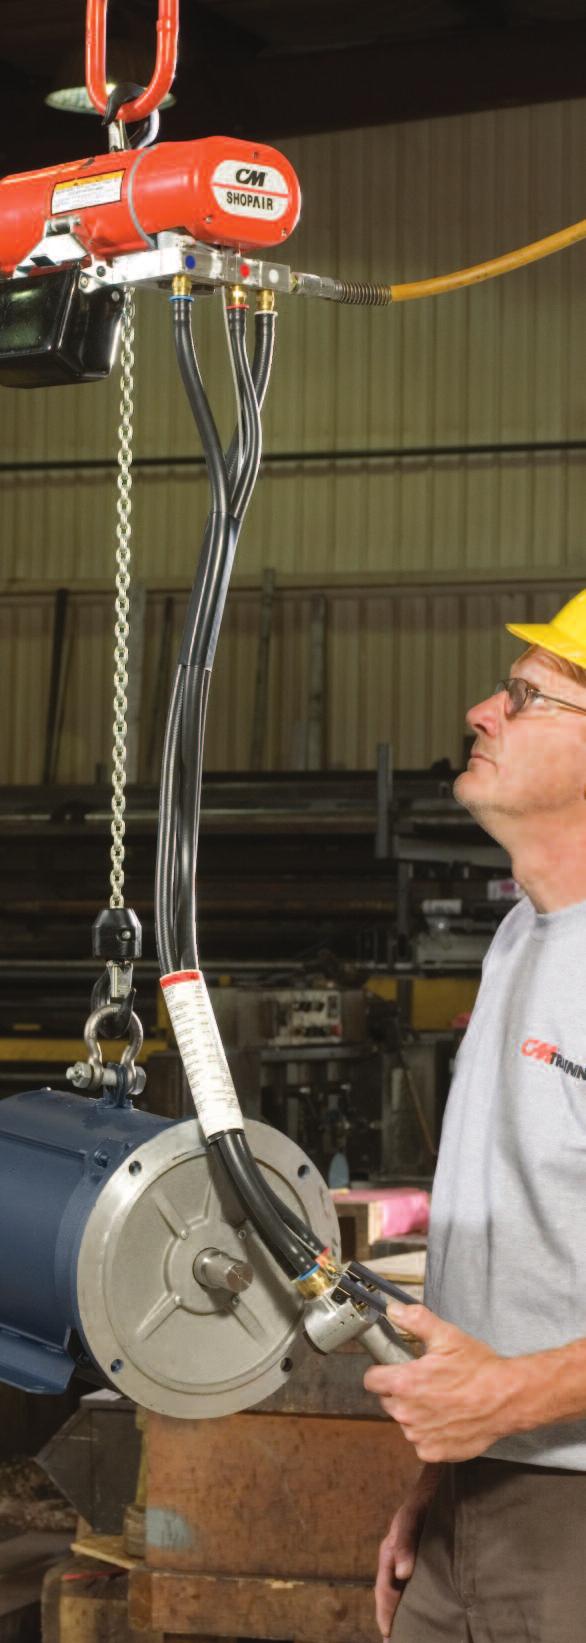 ShopAir TM chain hoist Compact, powerful, and precise for assembly and manufacturing applications up to 1,000 pounds.